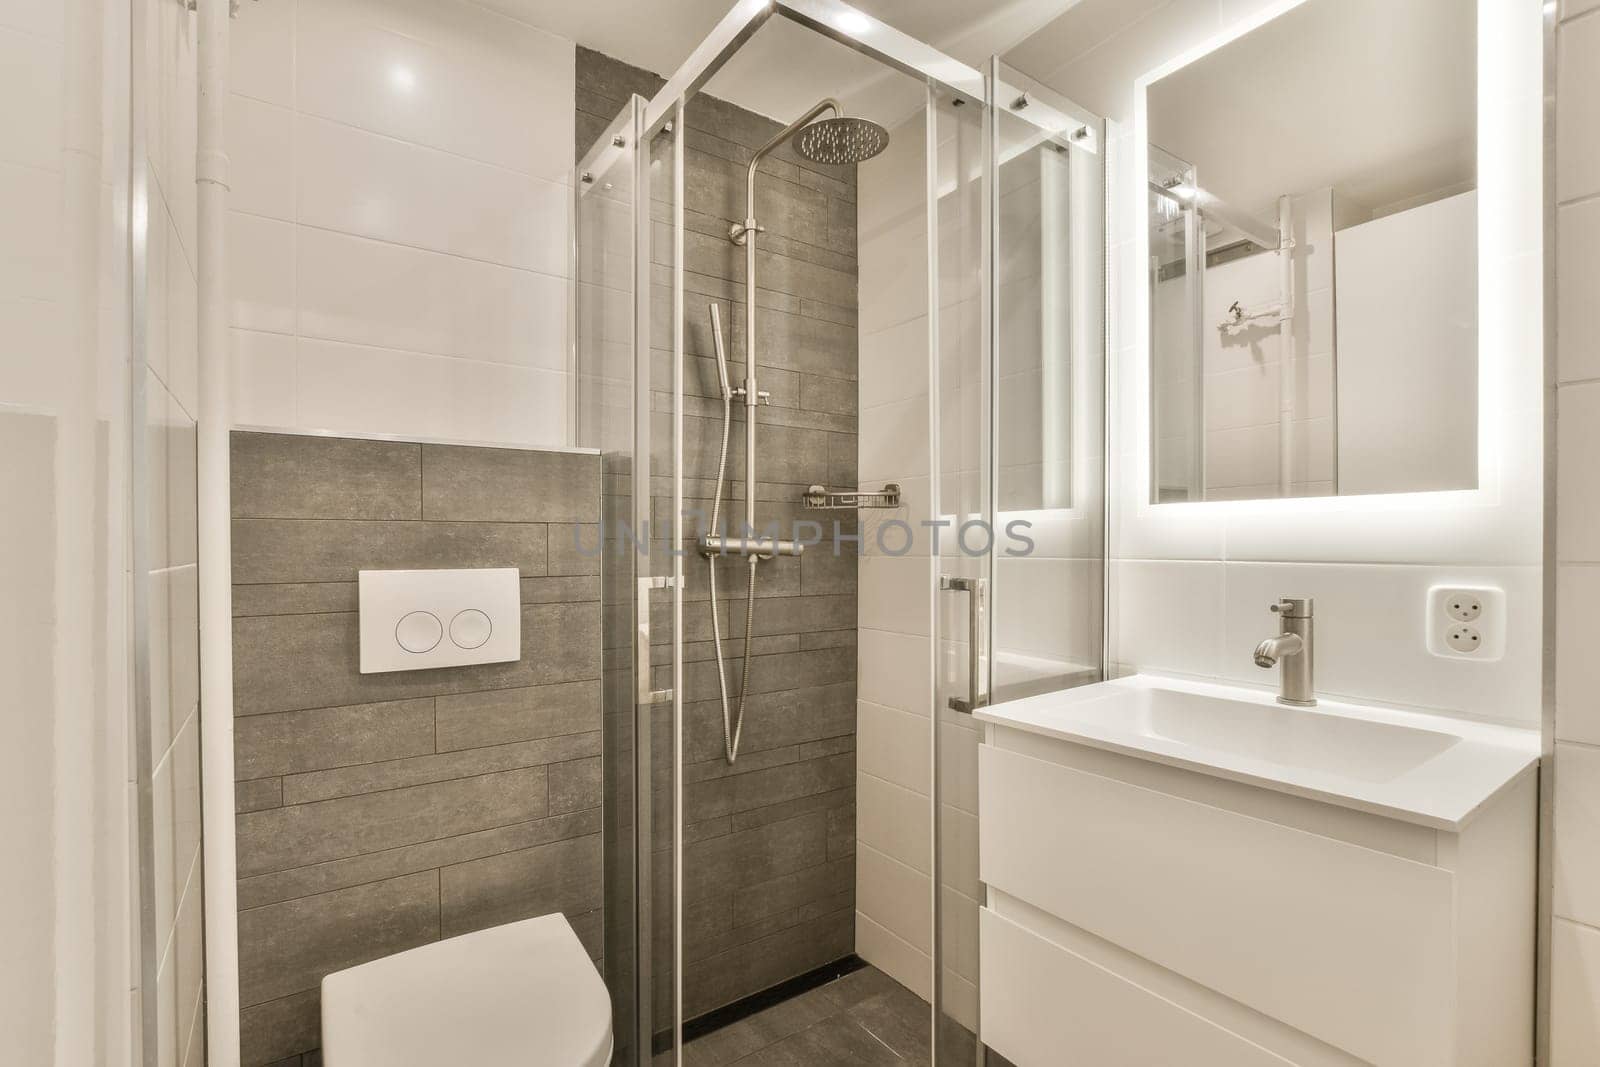 a bathroom with a white sink and toilet in the corner, next to a walk - in shower stall door